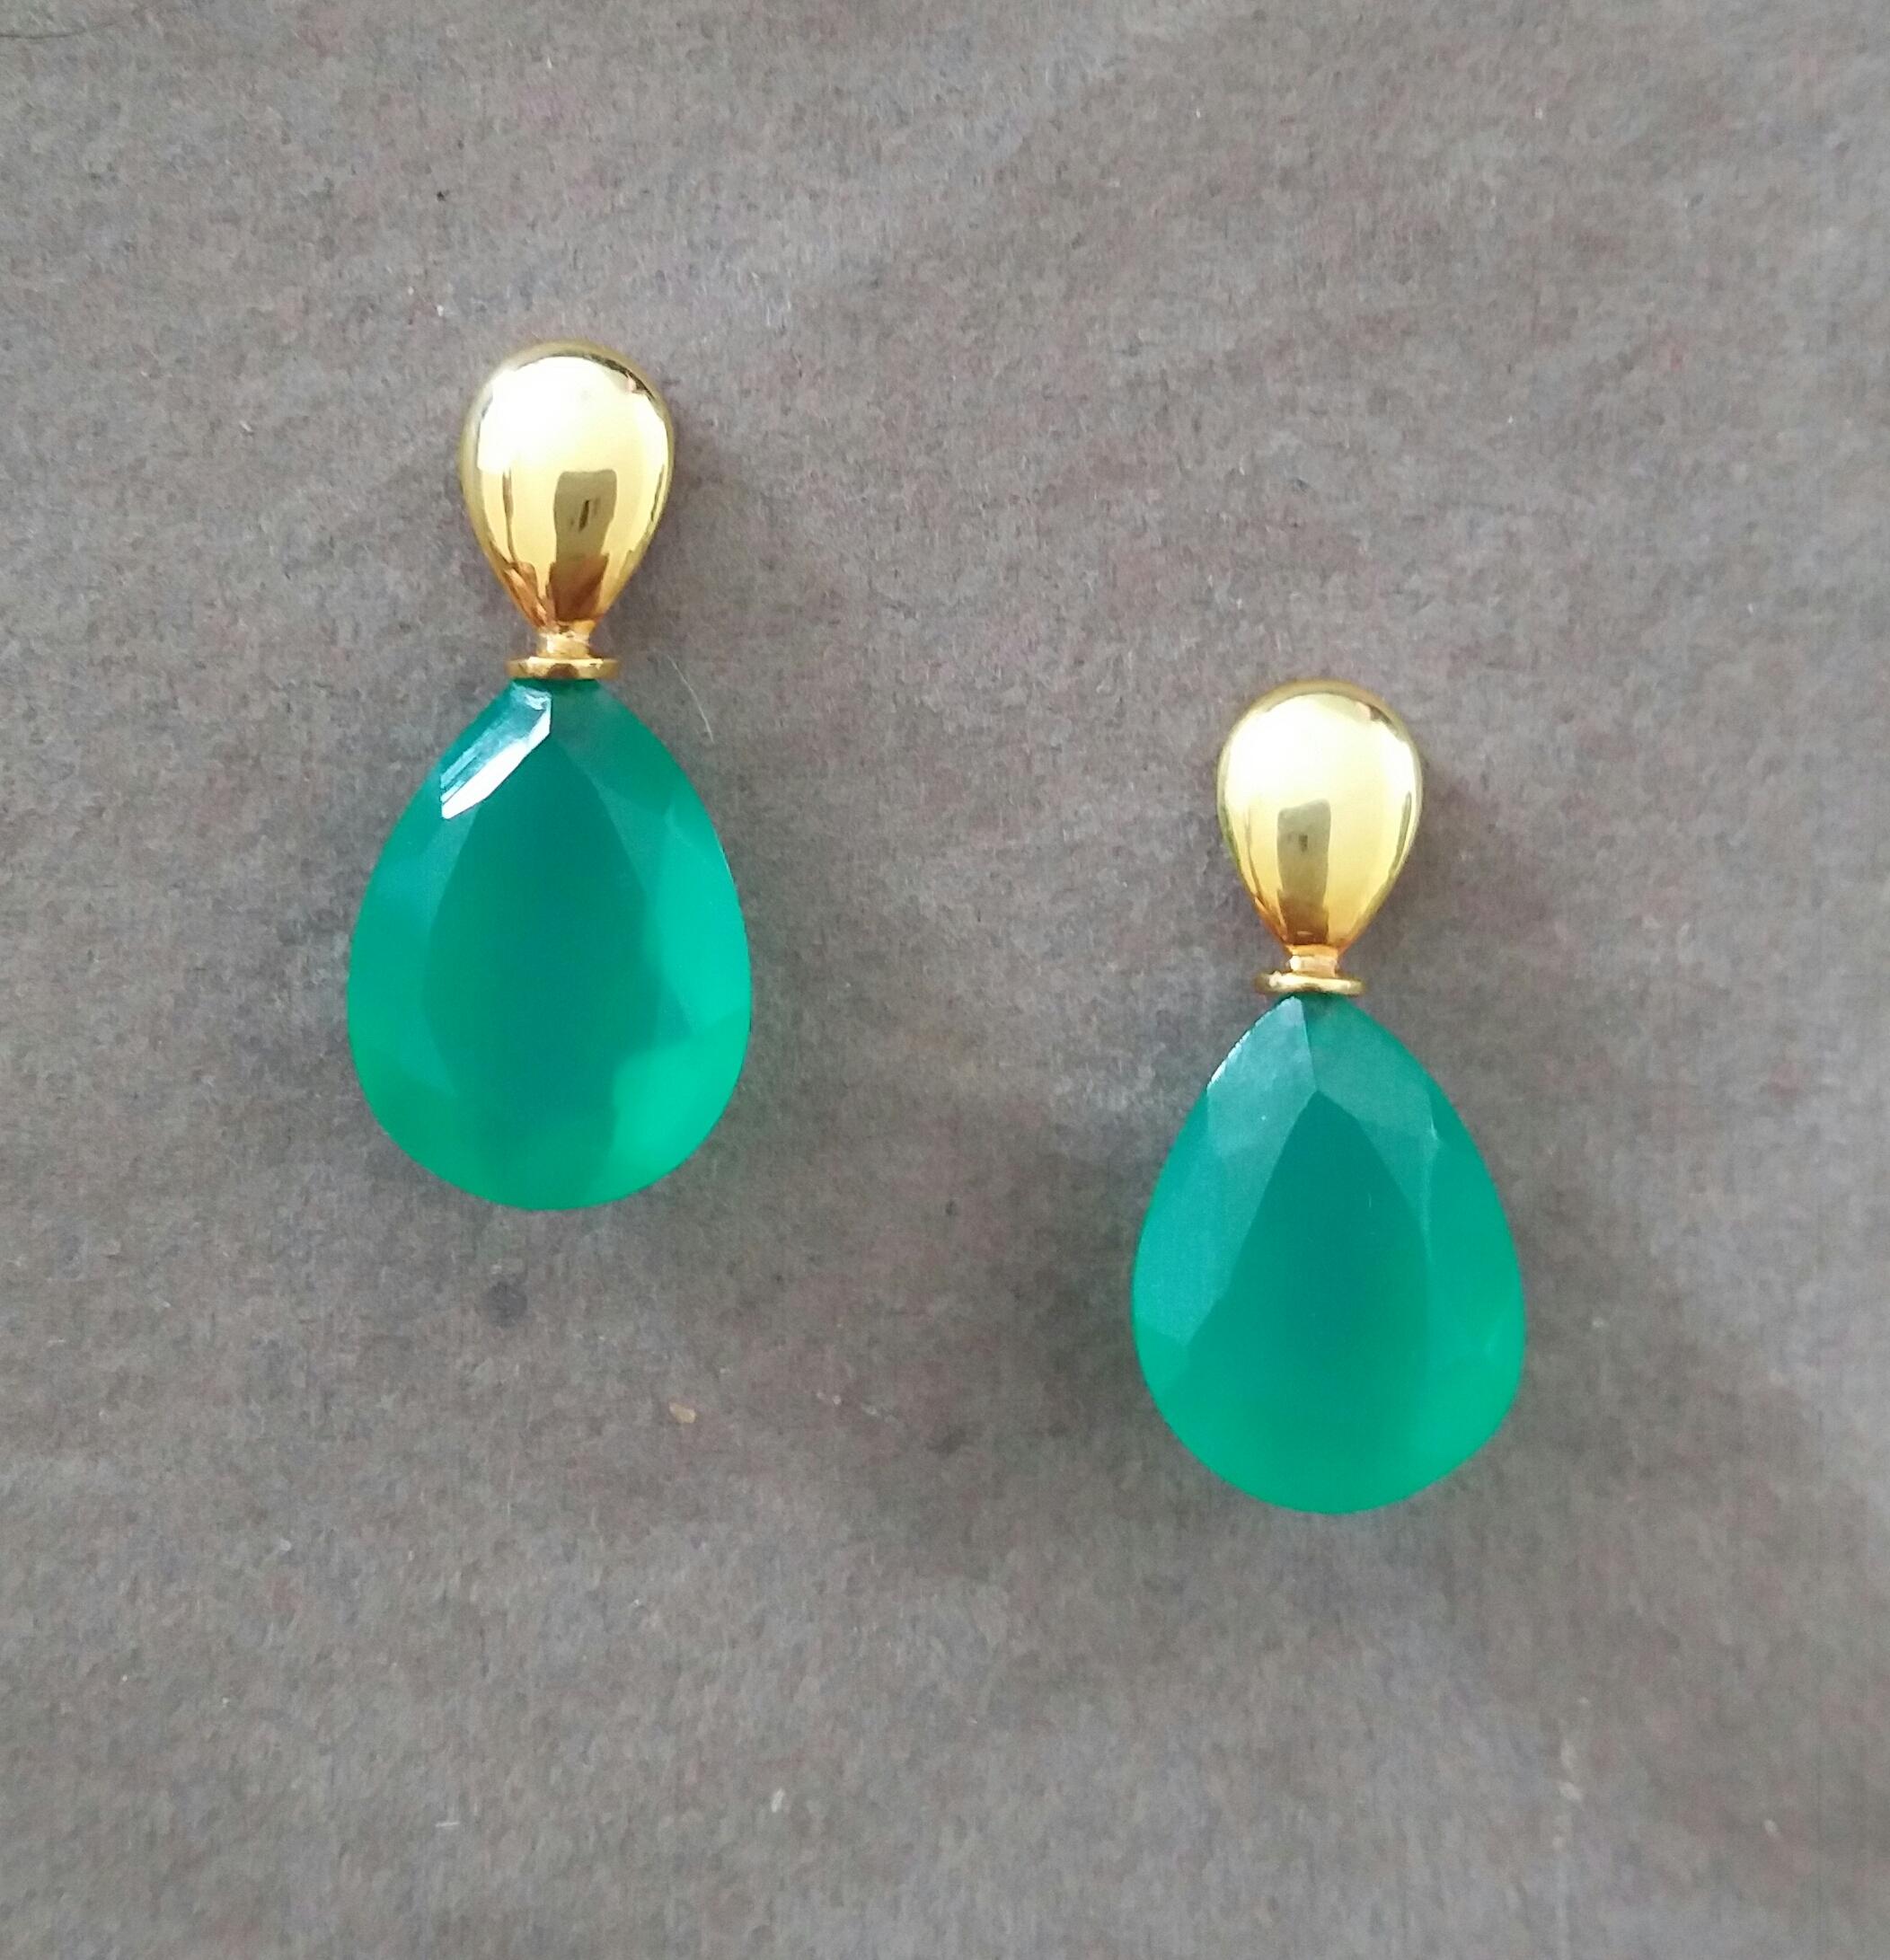 Simple Chic Earrings  made of 2 Faceted Pear Shape Natural Green Onyx measuring 12 x 16 mm and weighing 13 carats suspended from 2 plain yellow gold elements in a flat drop shapes.

In 1978 our workshop started in Italy to make simple-chic Art Deco